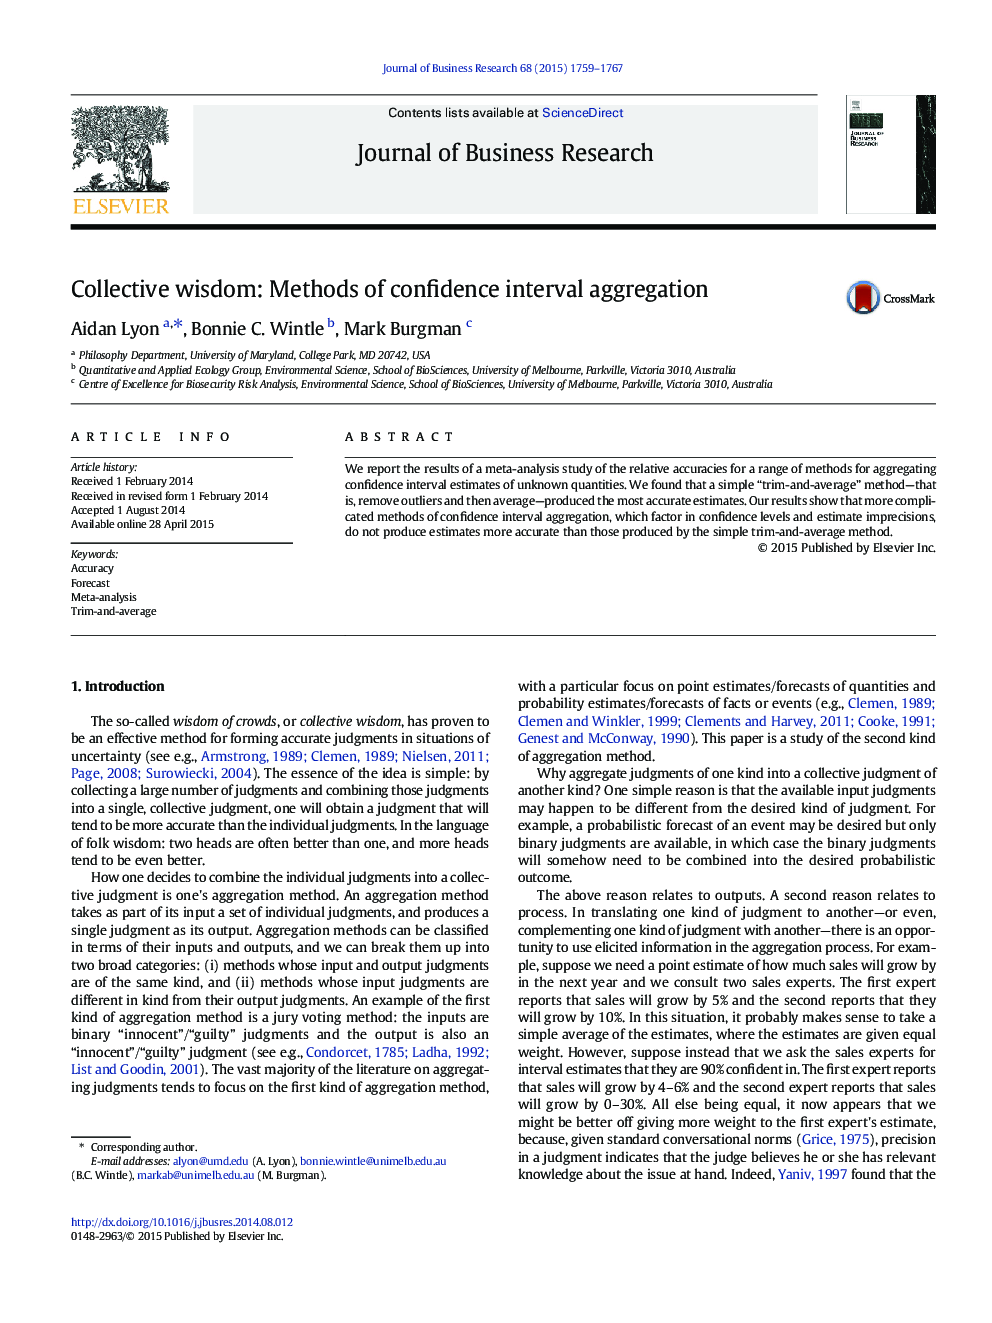 Collective wisdom: Methods of confidence interval aggregation